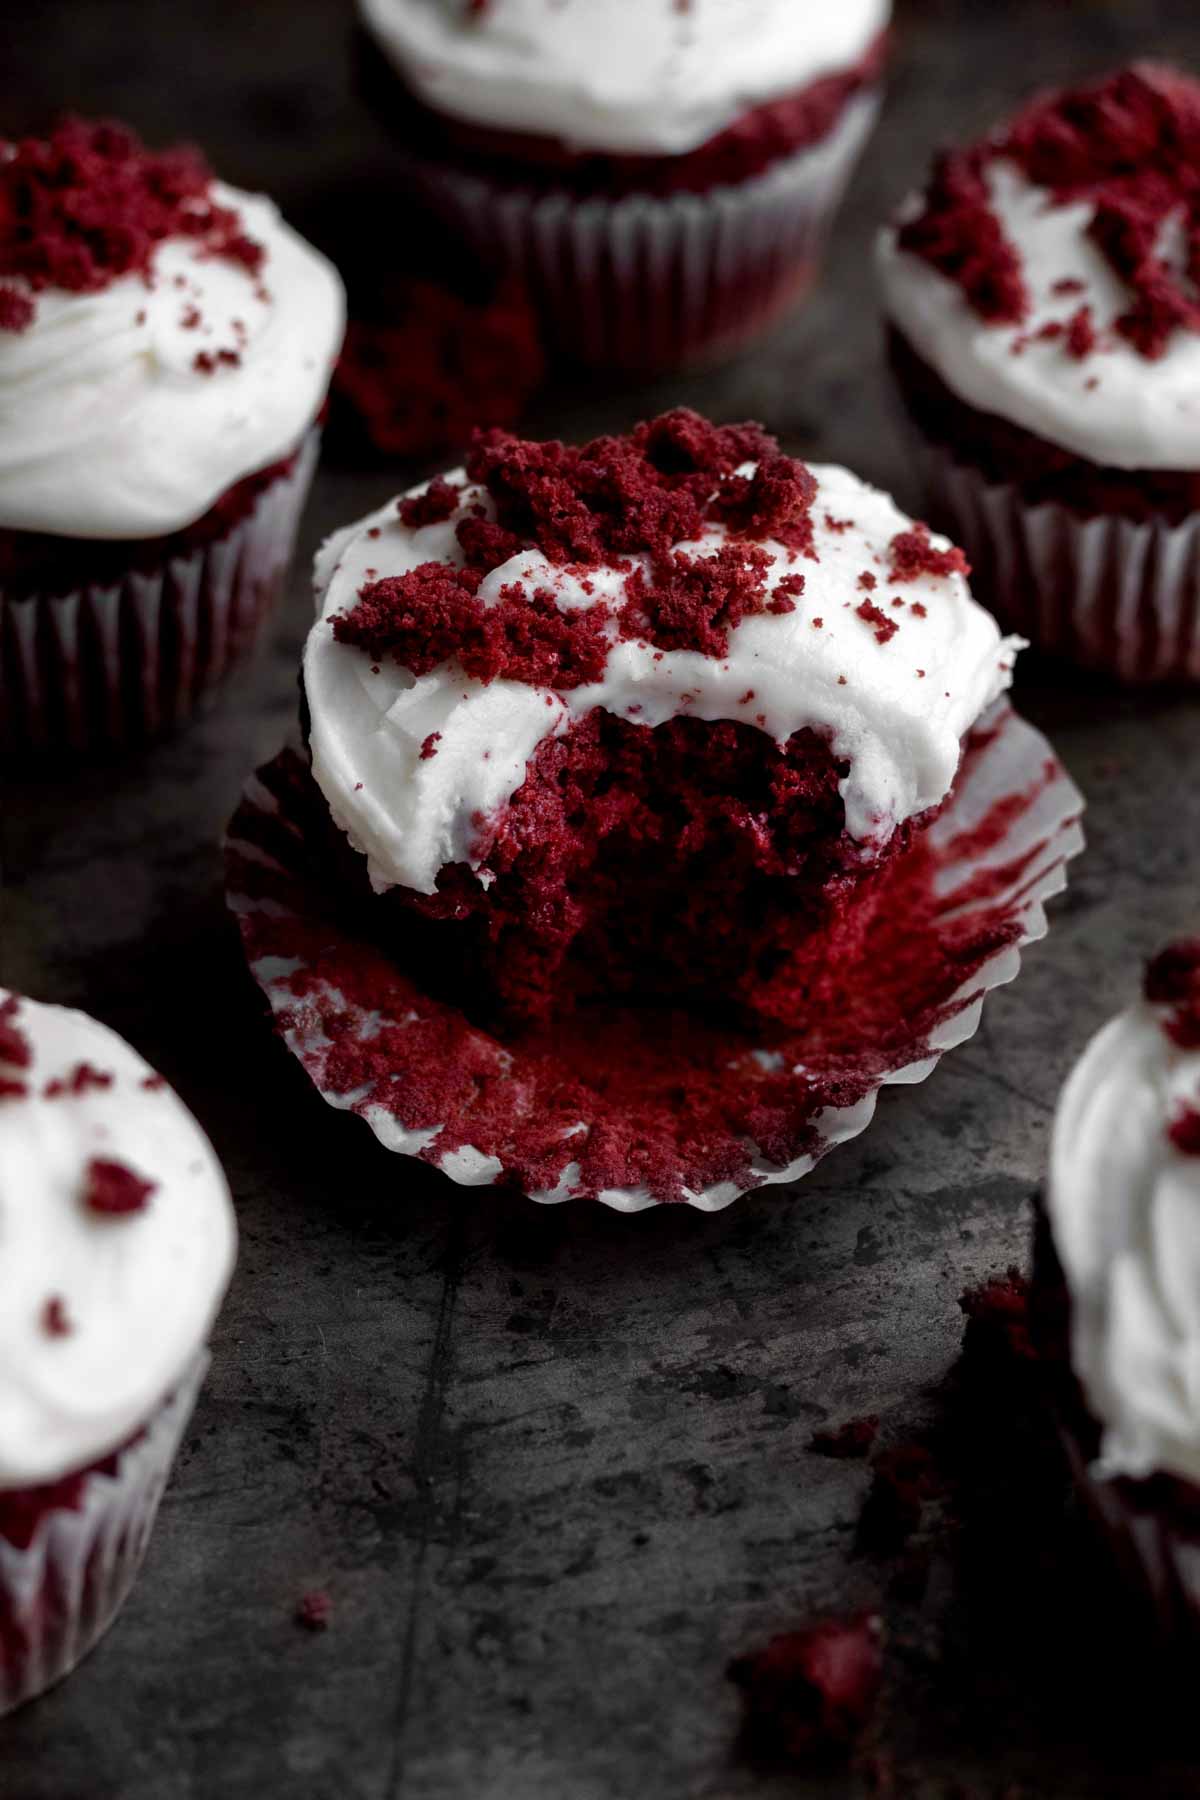 A gluten free Red Velvet Cupcake with a bite taken out.